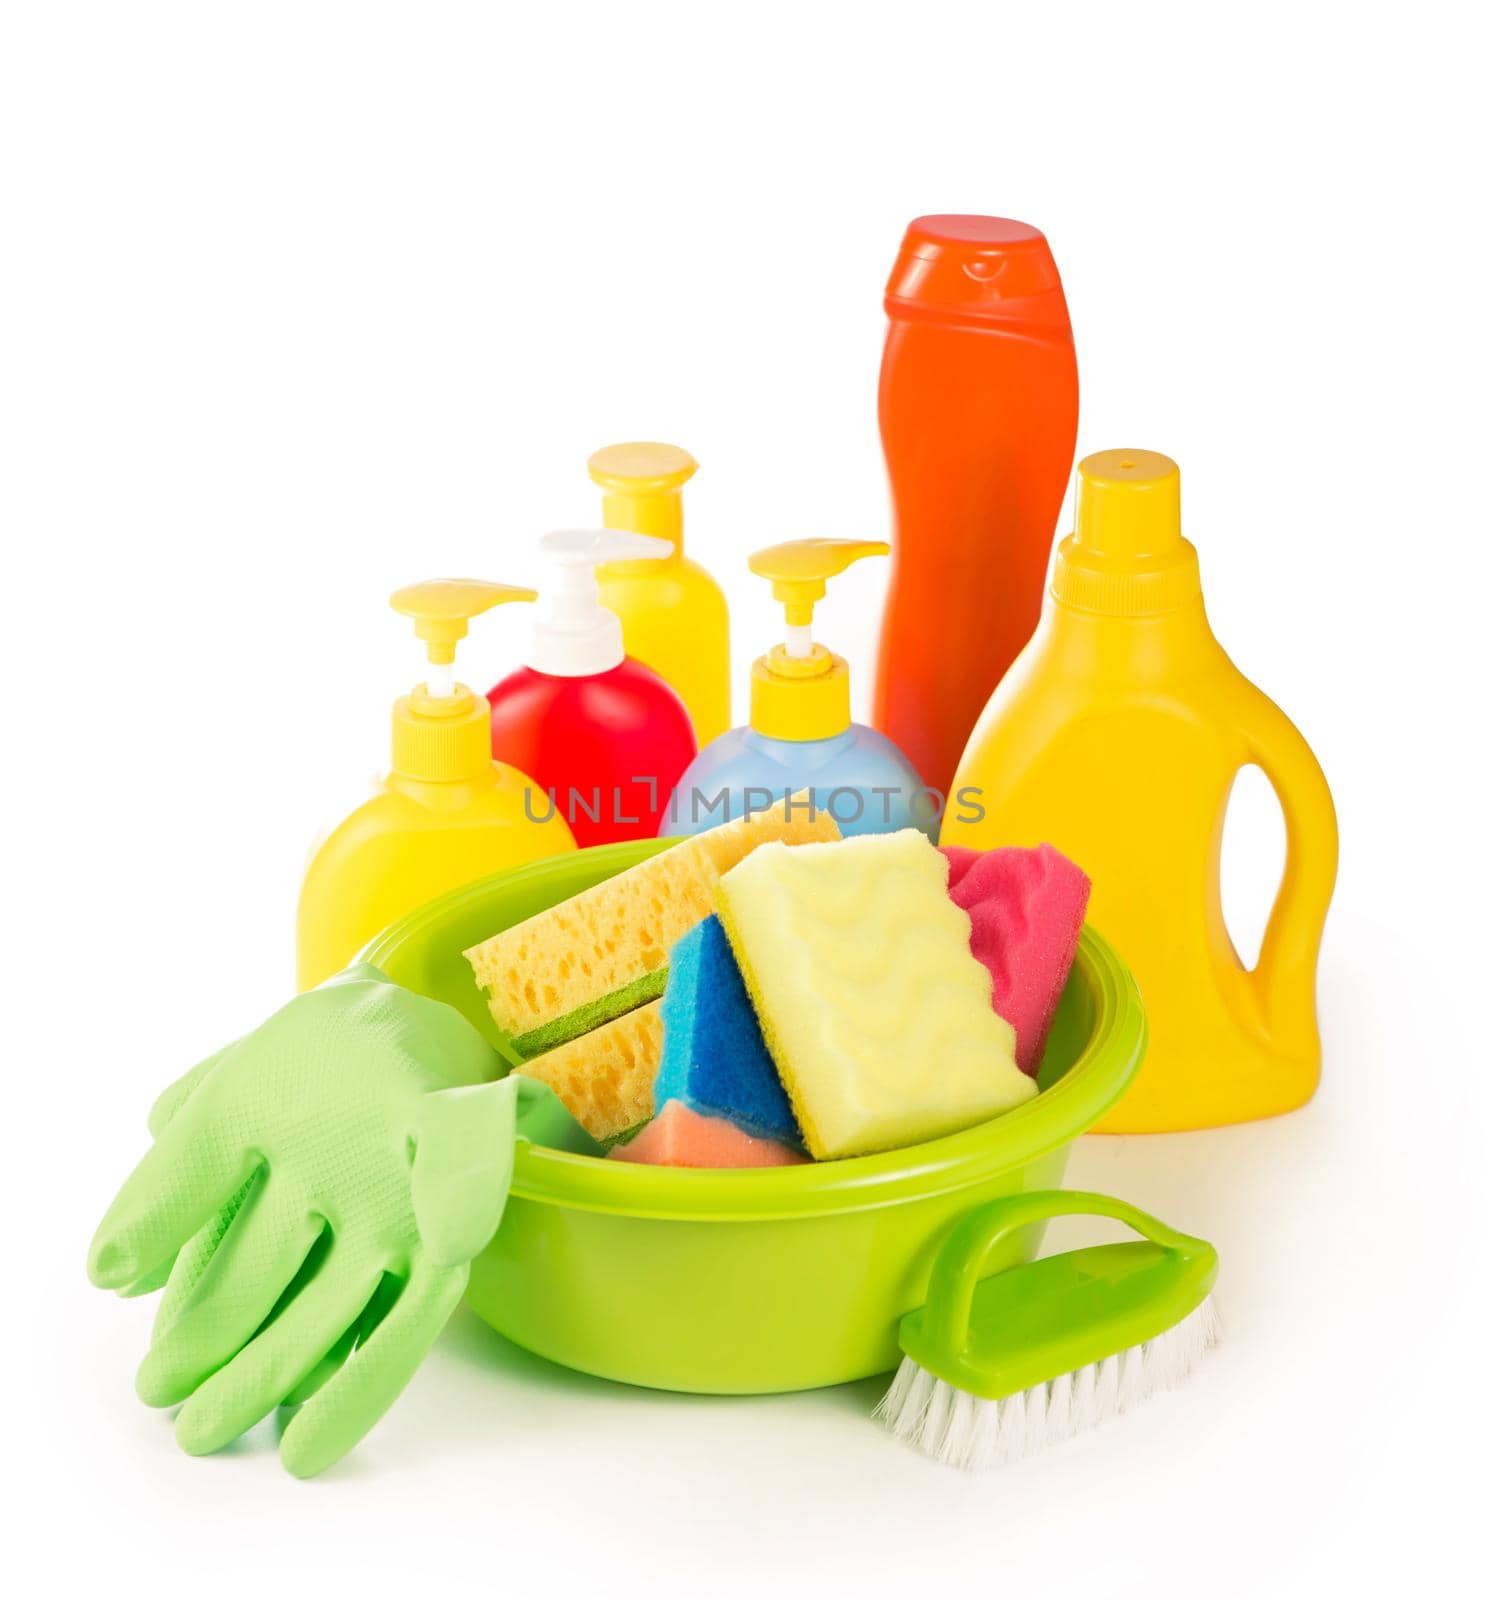 concept - house cleaning. Detergents, scouring powders, scouring pads and gloves for cleaning the house by aprilphoto